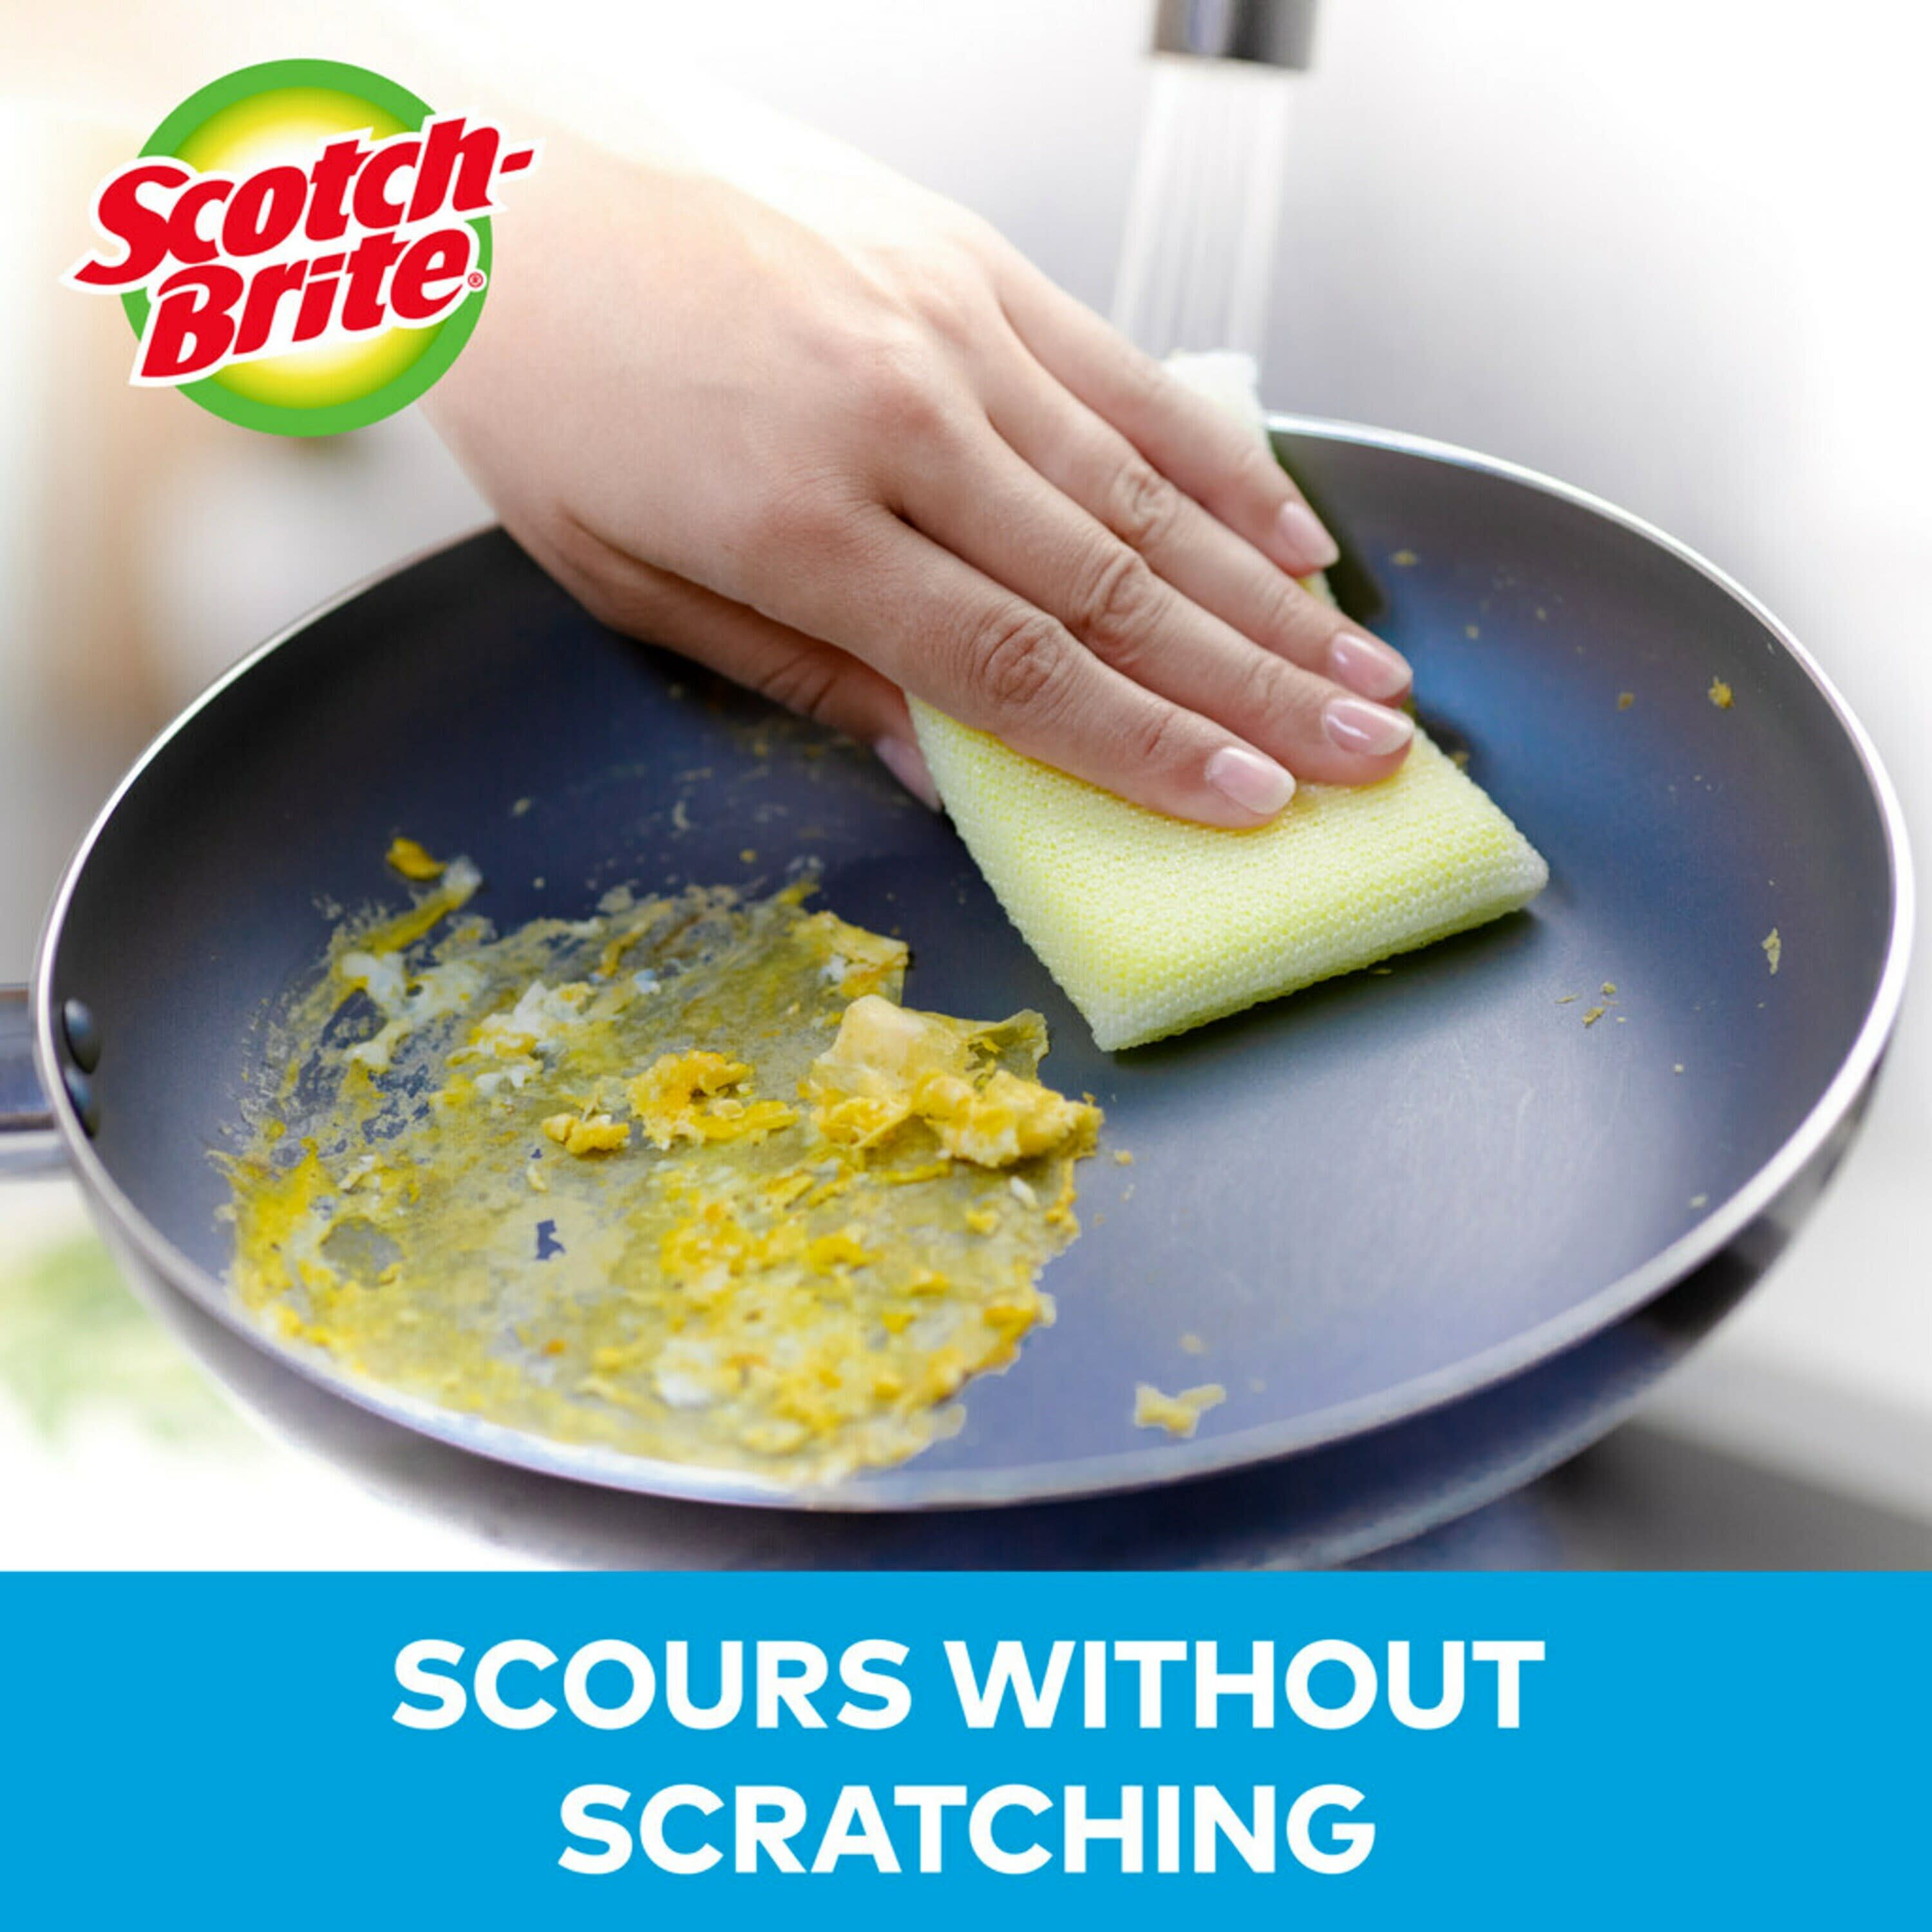 Buy Beldray Cleaning Sponges, Dish Scourers & Scrubbing Pads